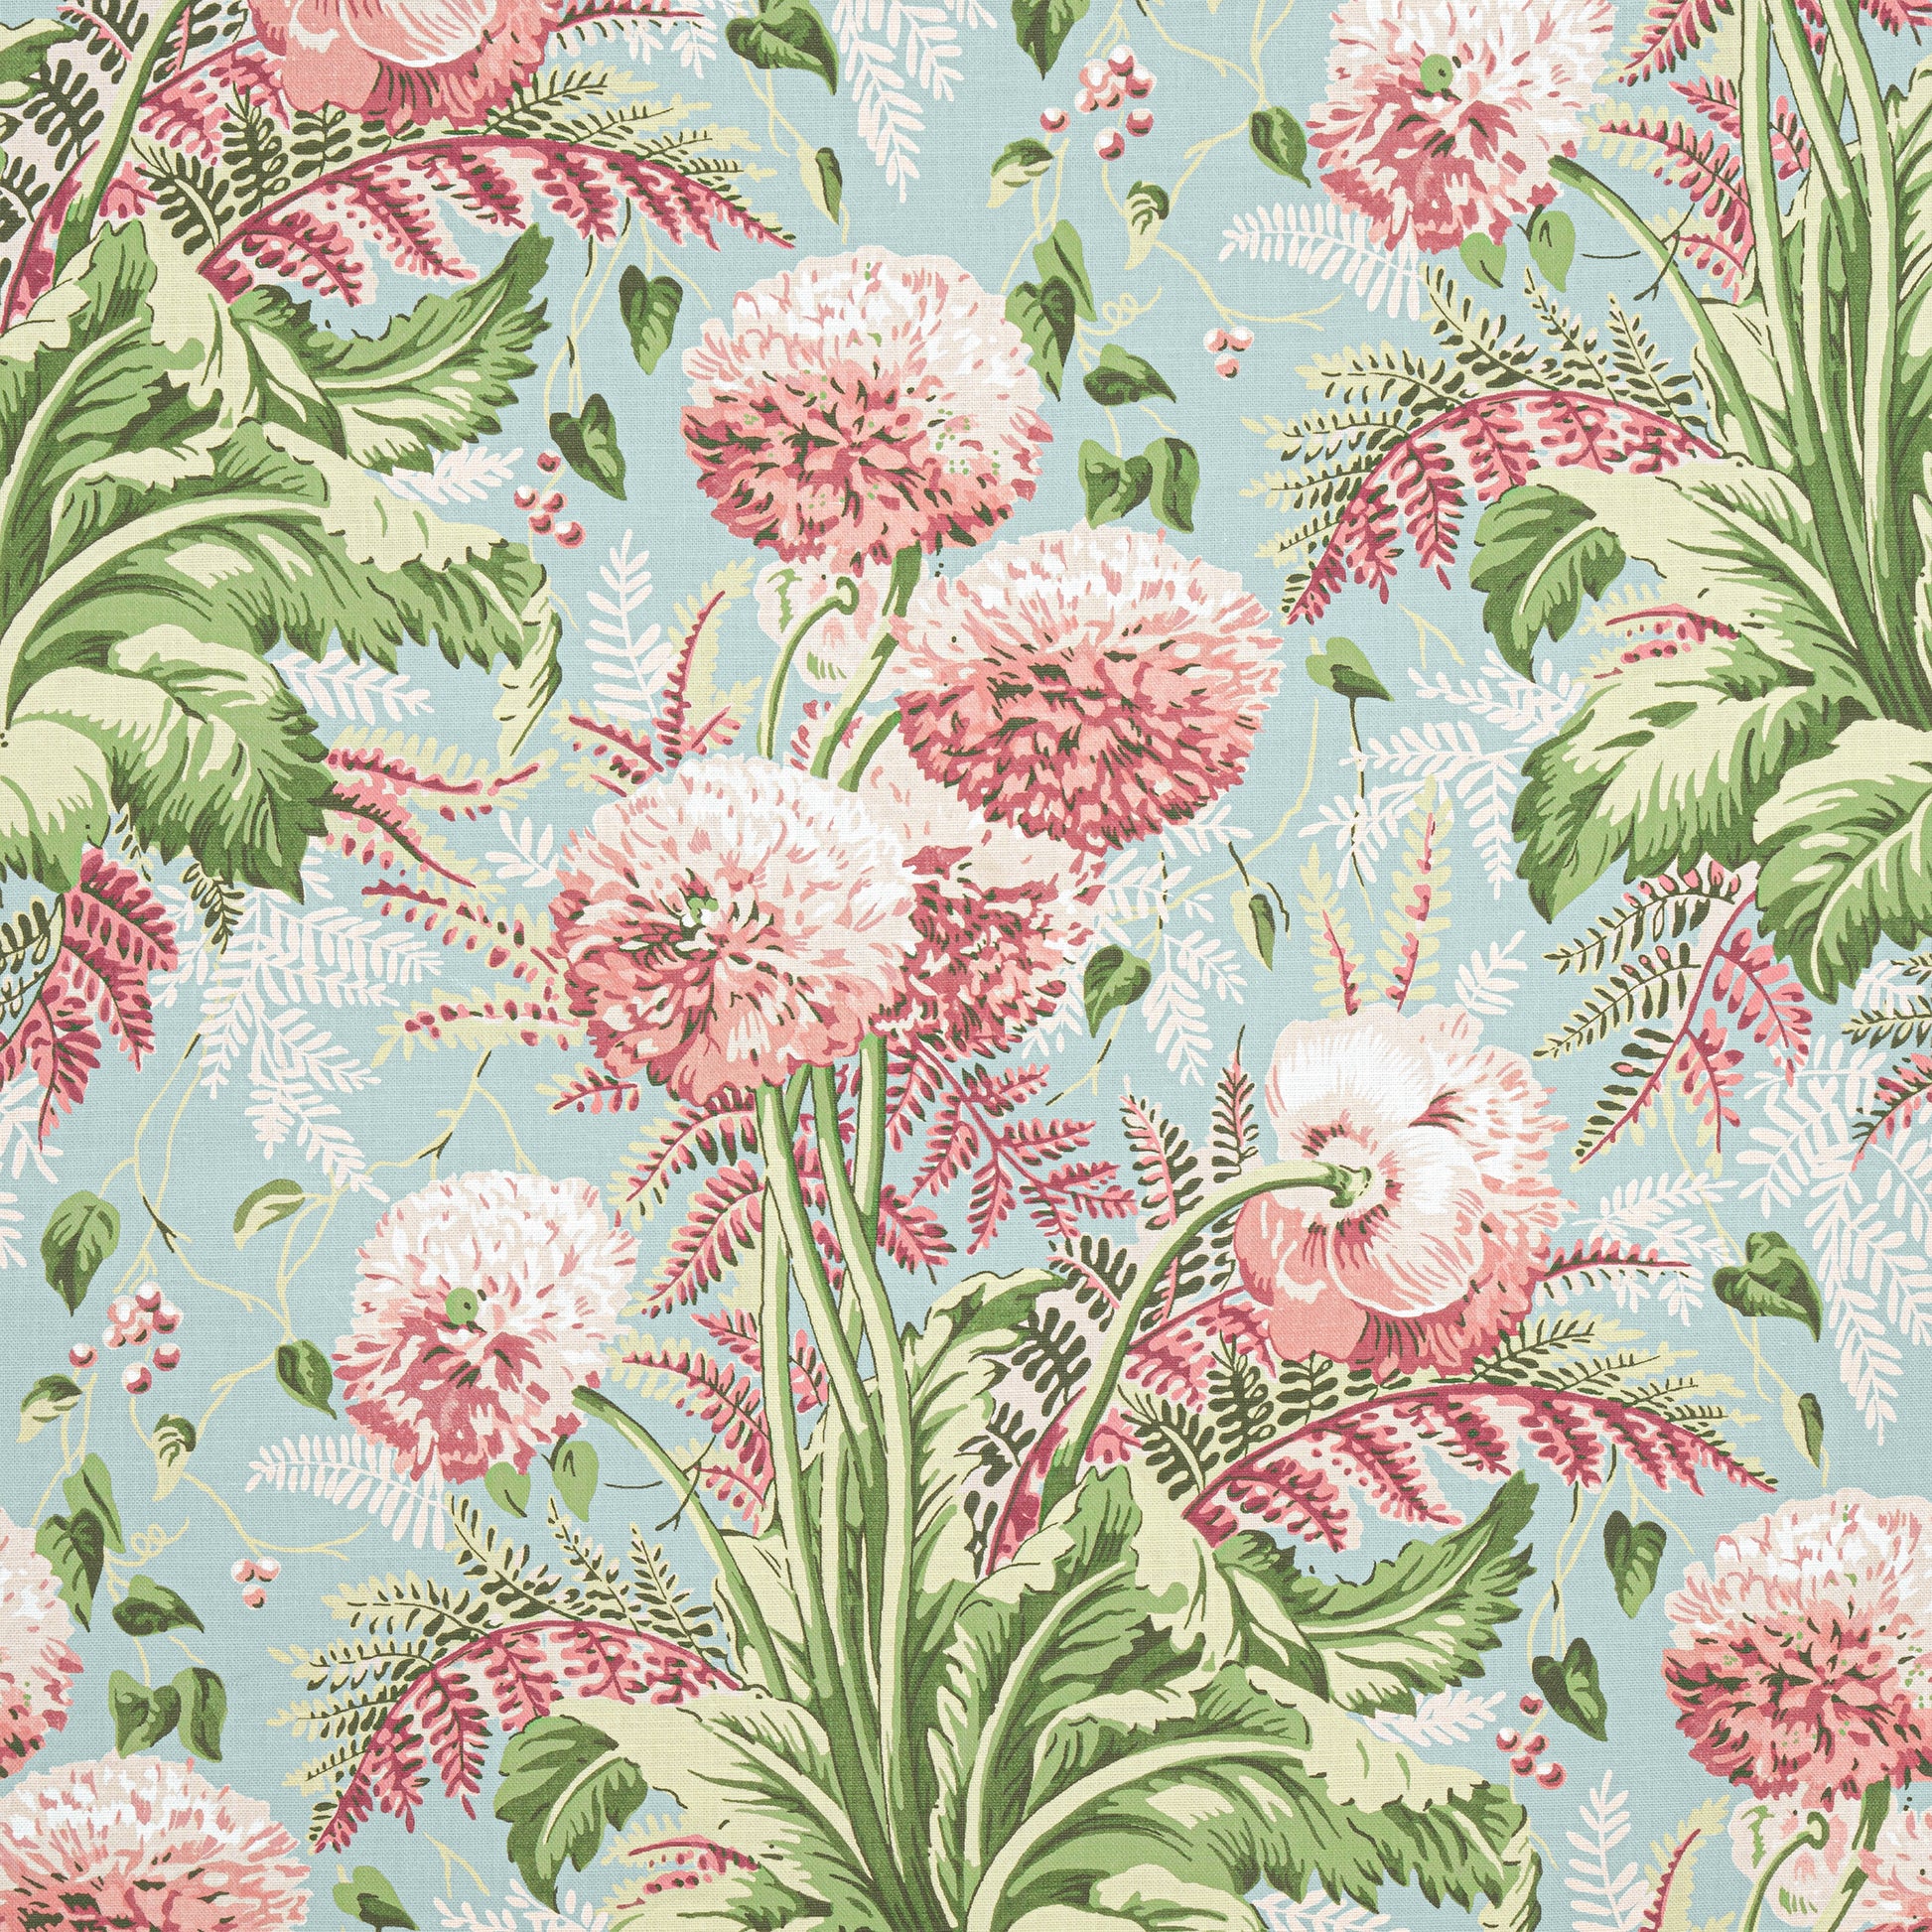 Purchase  Ann French Fabric Item# AF24537  pattern name  Dahlia